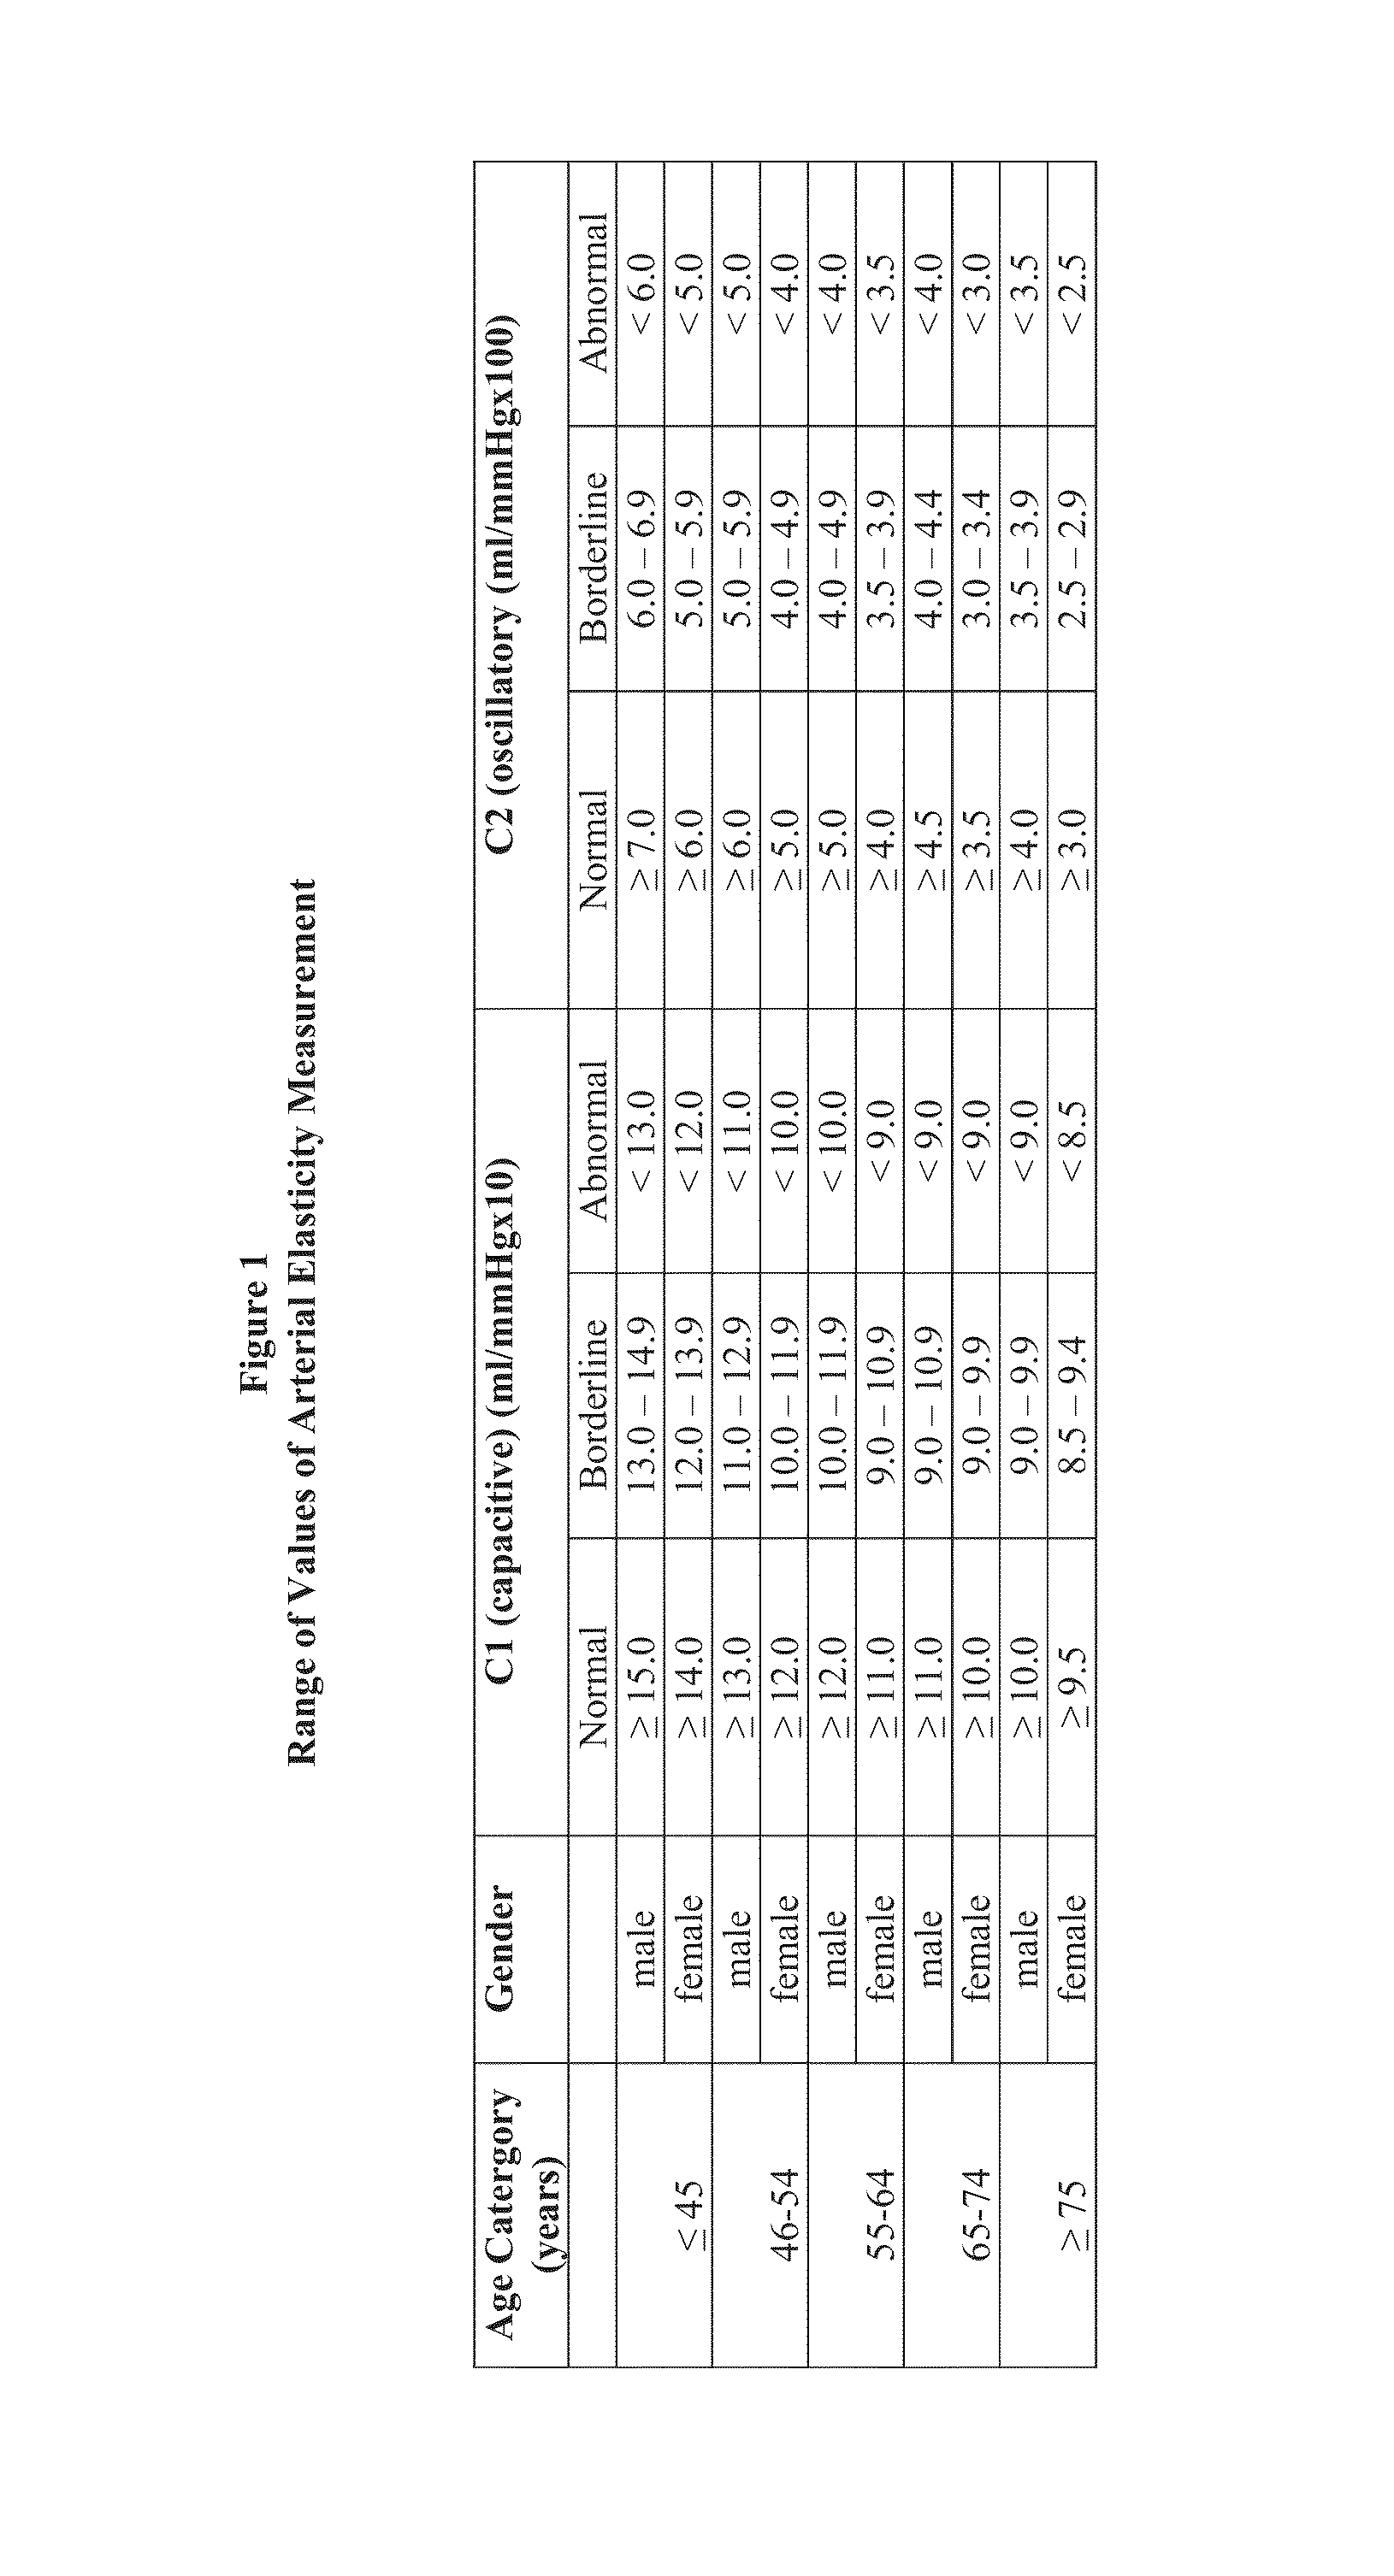 System and method for dynamic multi-stage test administration for detection of cardiovascular disease